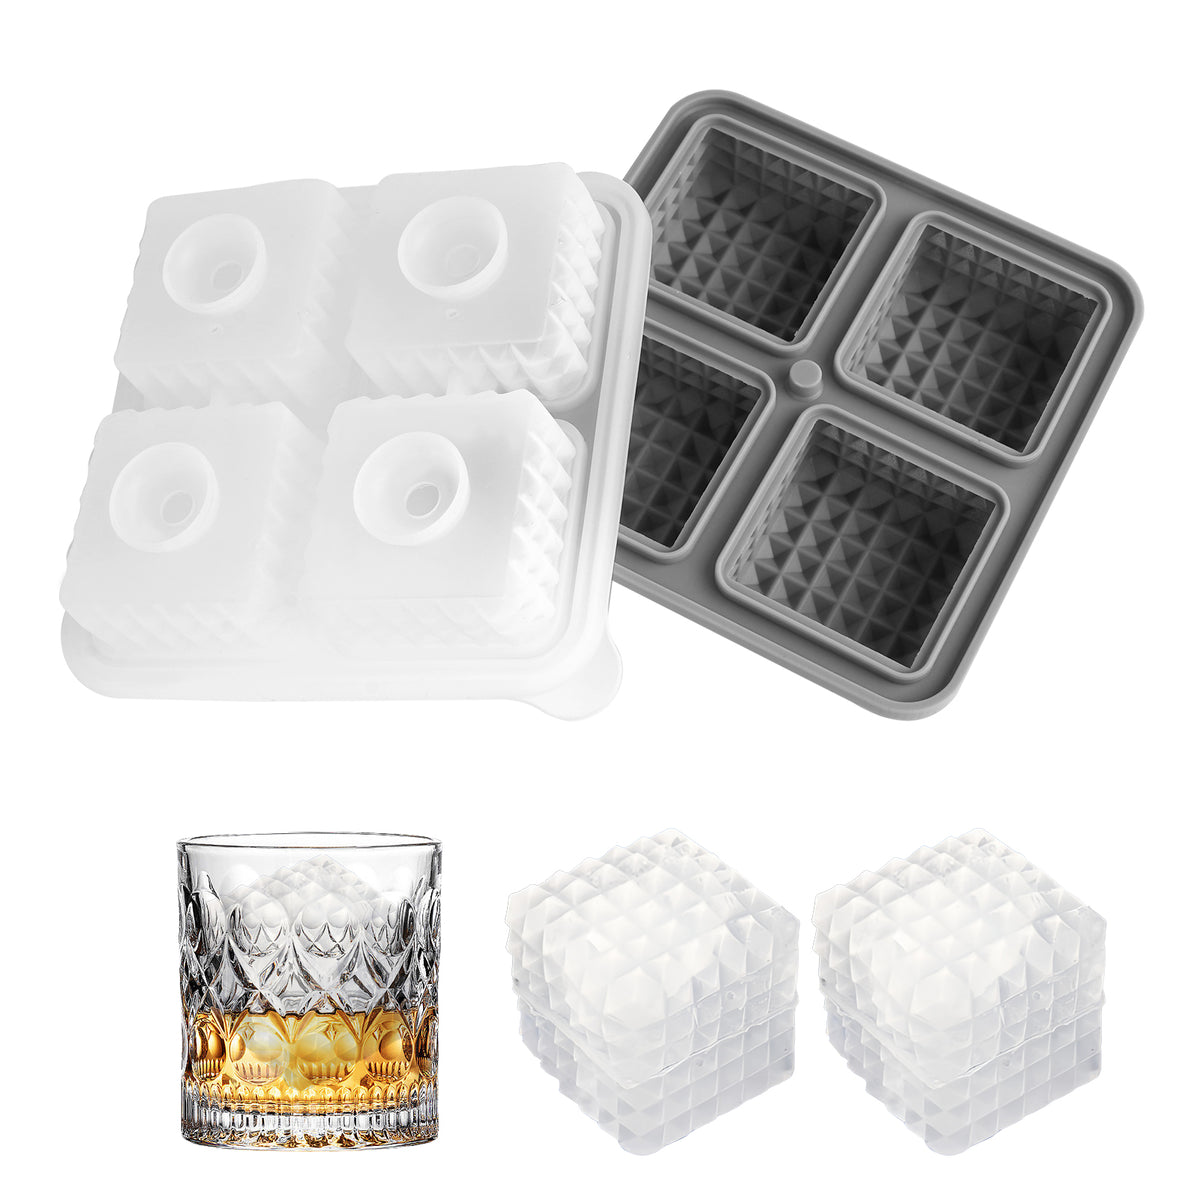 Adorila Silicone Ice Cube Tray, 4 Square Slots Ice Cube Trays for Freezer with Lid, Leak-Free Ice Ball Maker Mold for Whiskey, Cocktails, Bourbon (Grey)